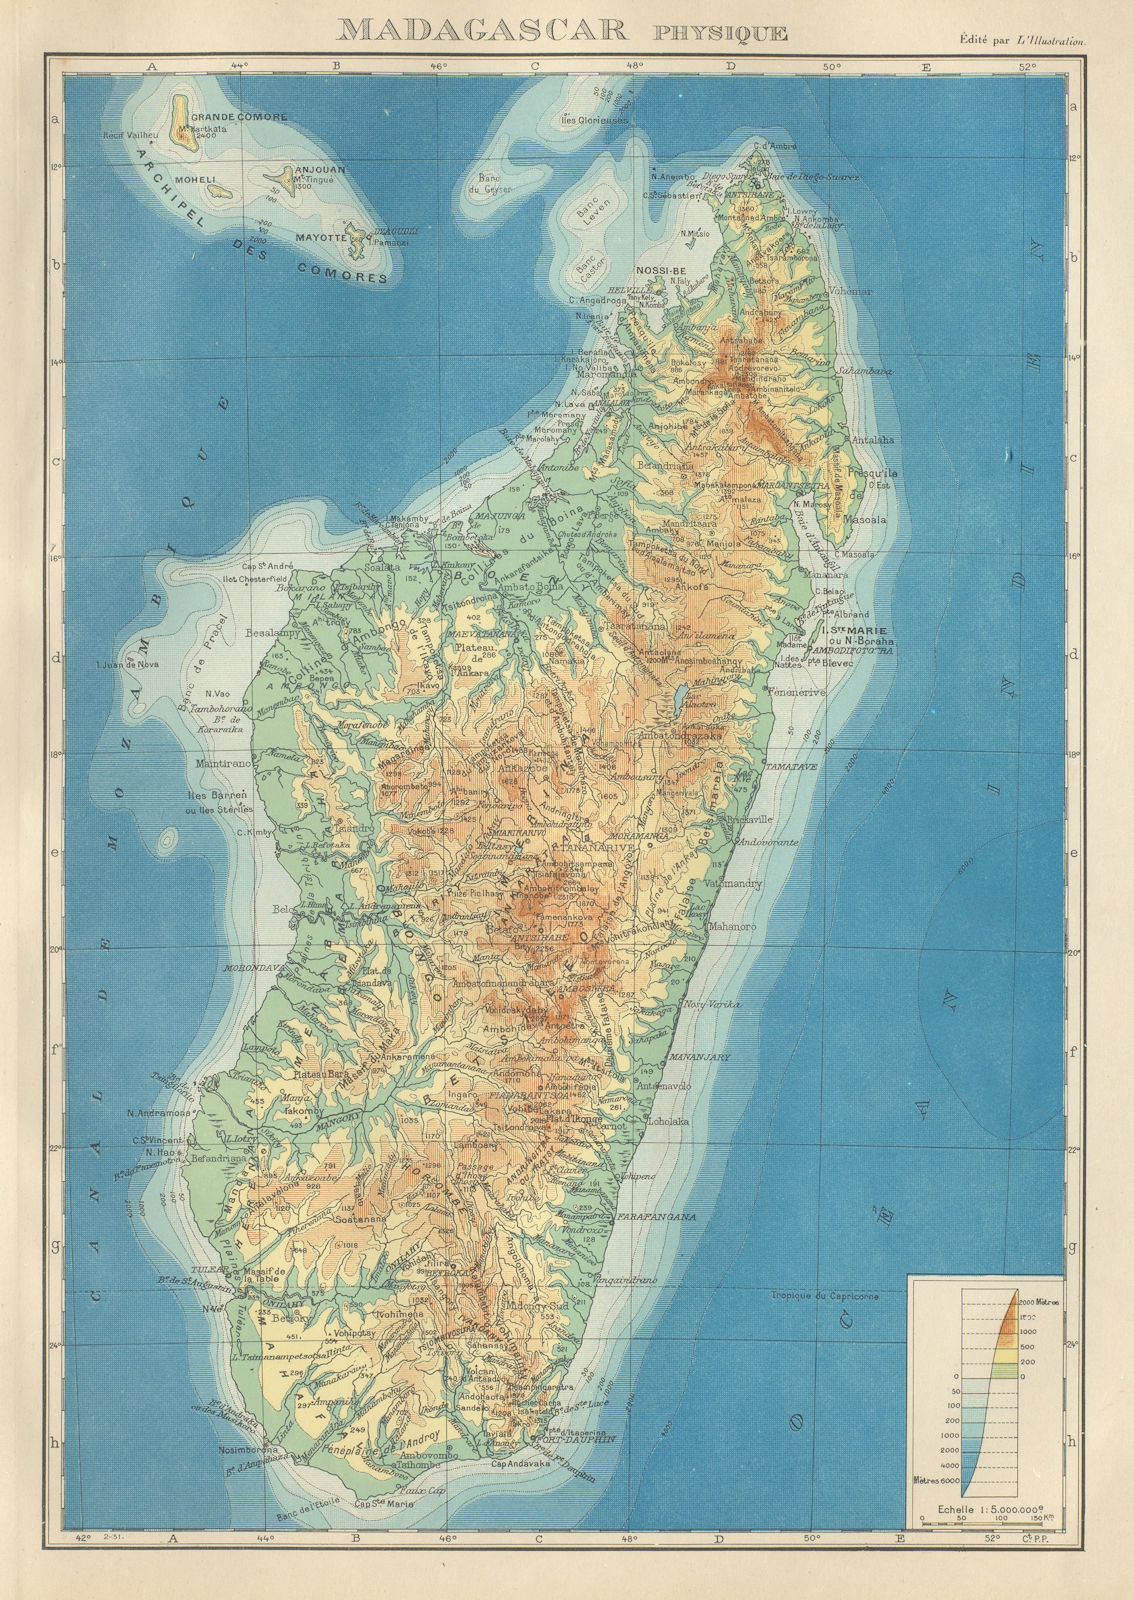 COLONIAL MADAGASCAR. Physique physical. Comoros & Mayotte 1931 old vintage map